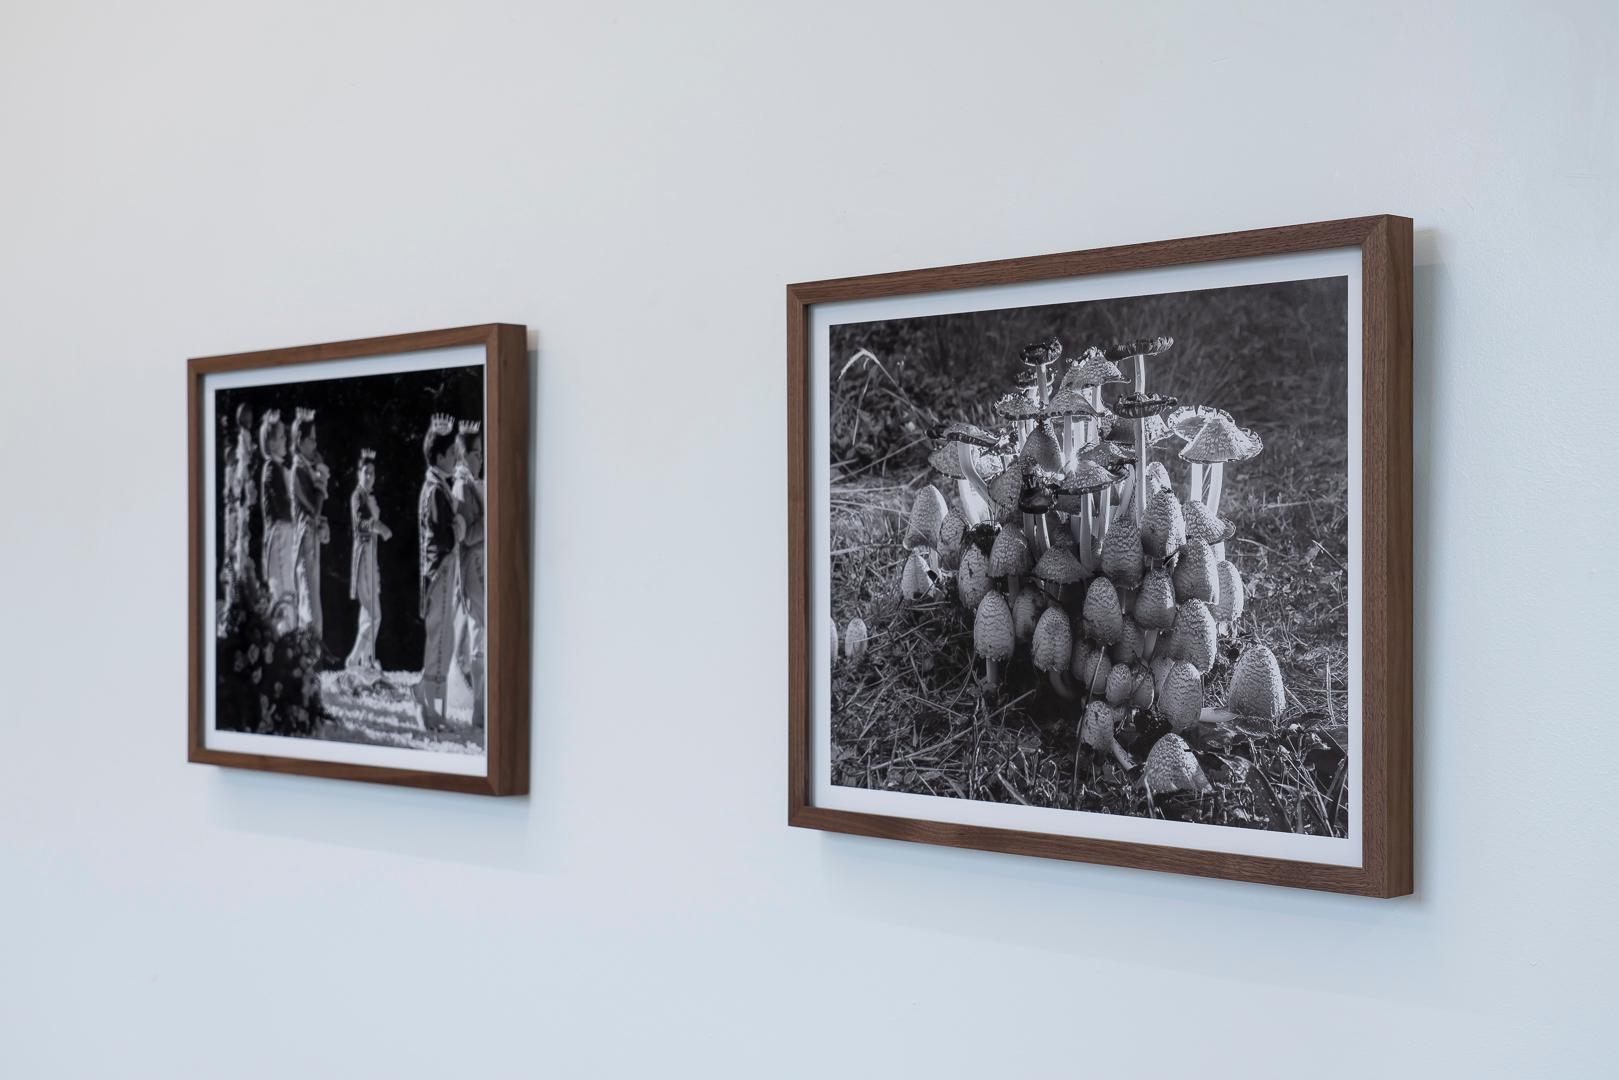 Mushrooms(1/4), Contemporary Black & White Photo, Framed Archival Pigment Print - Photograph by Eli Durst